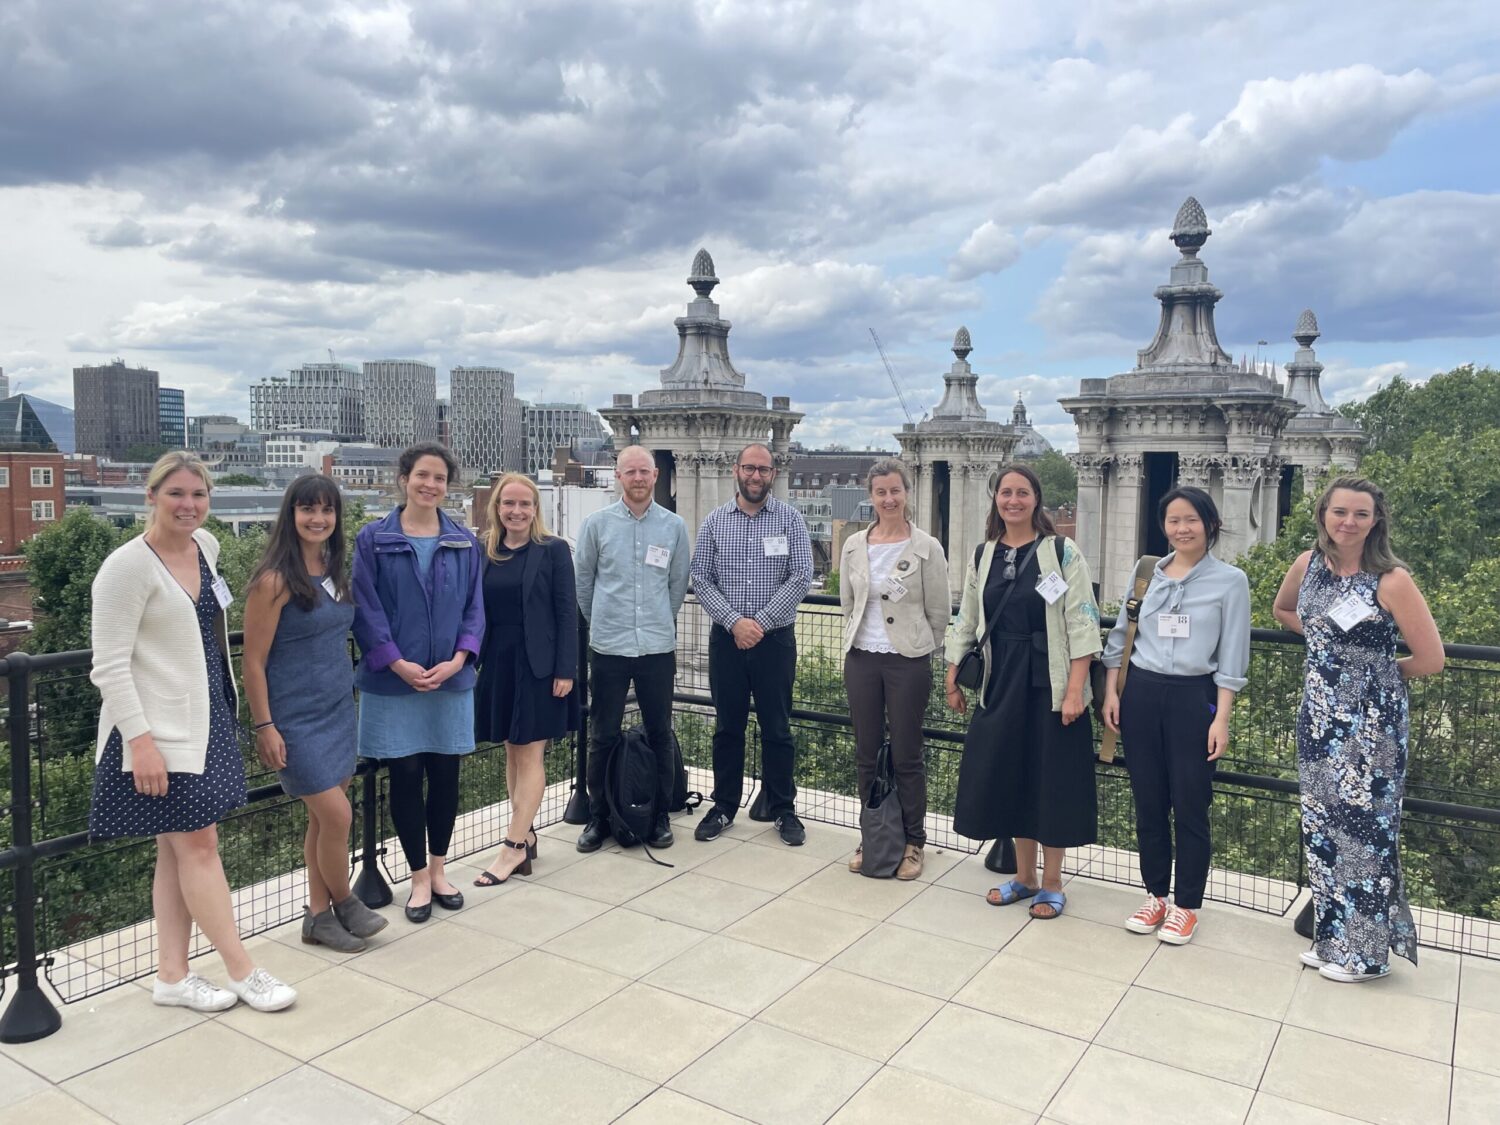 Members of University of Nottingham's Policy Impact Accelerator/ Pathway Program cohorts at the rooftop overlooking London skyline